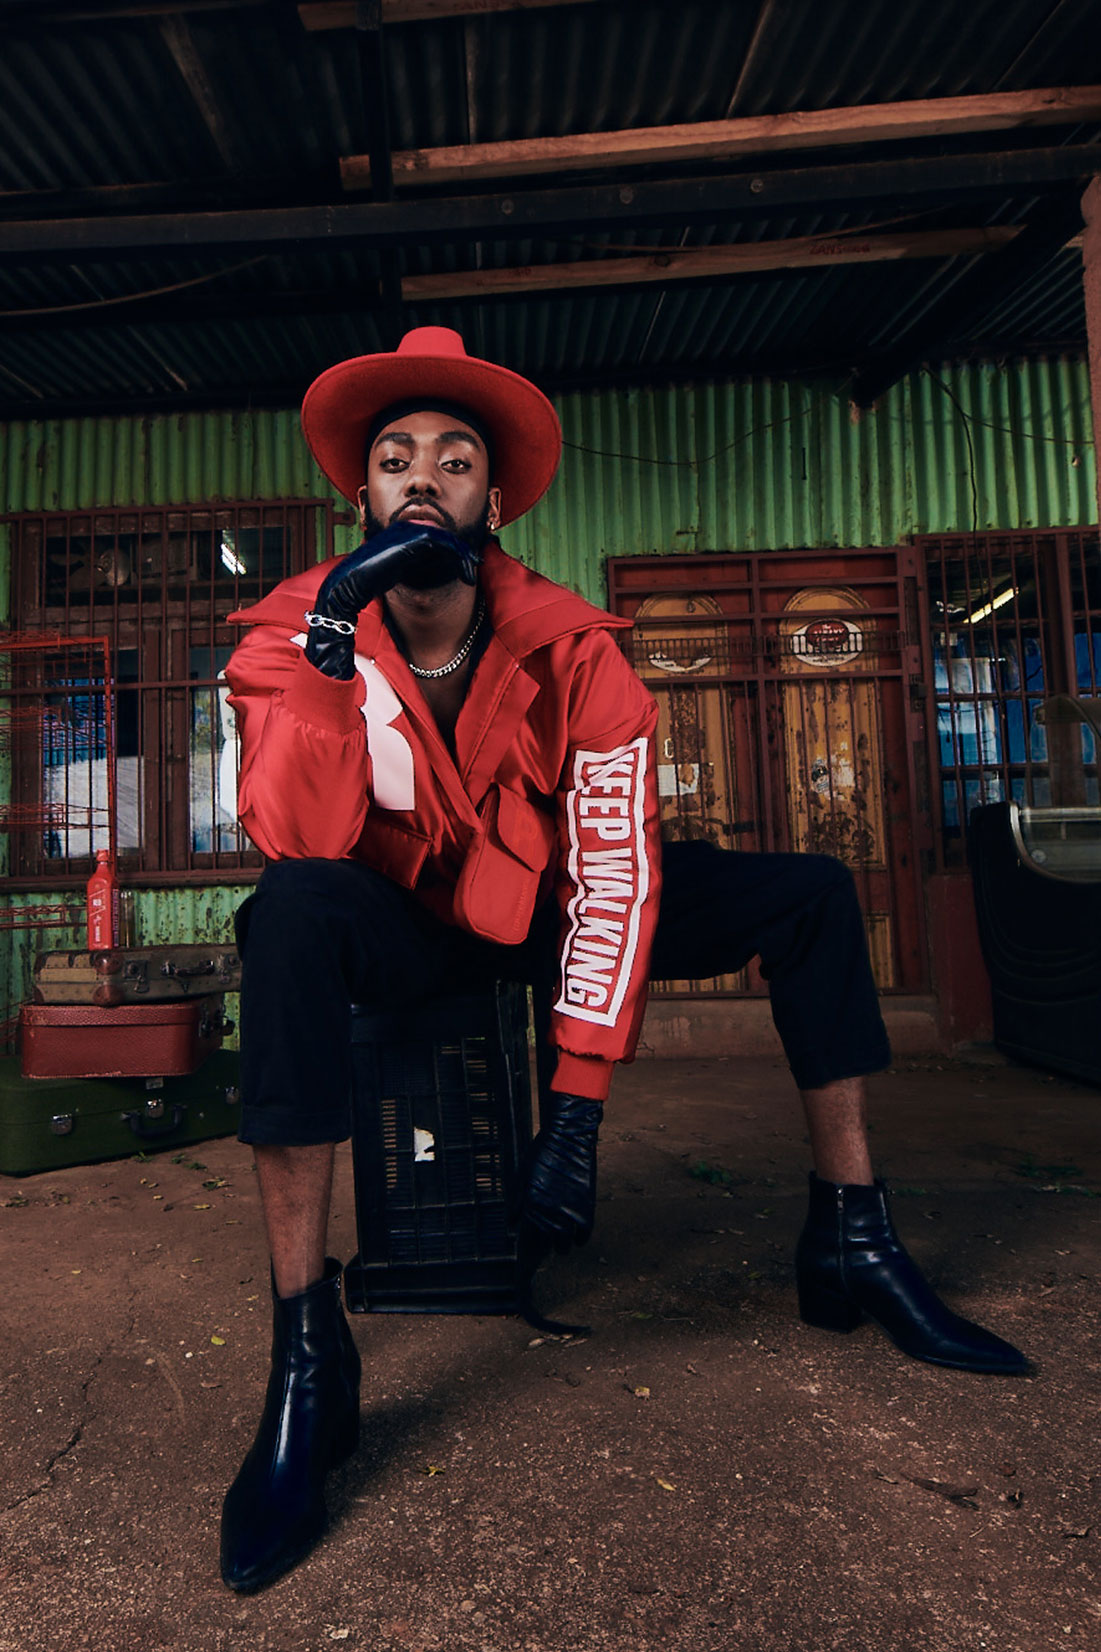 Rich Mnisi: We partner with Johnnie Walker to celebrate their 200th anniversary and bring to life a capsule collection that speaks to pushing boundaries.